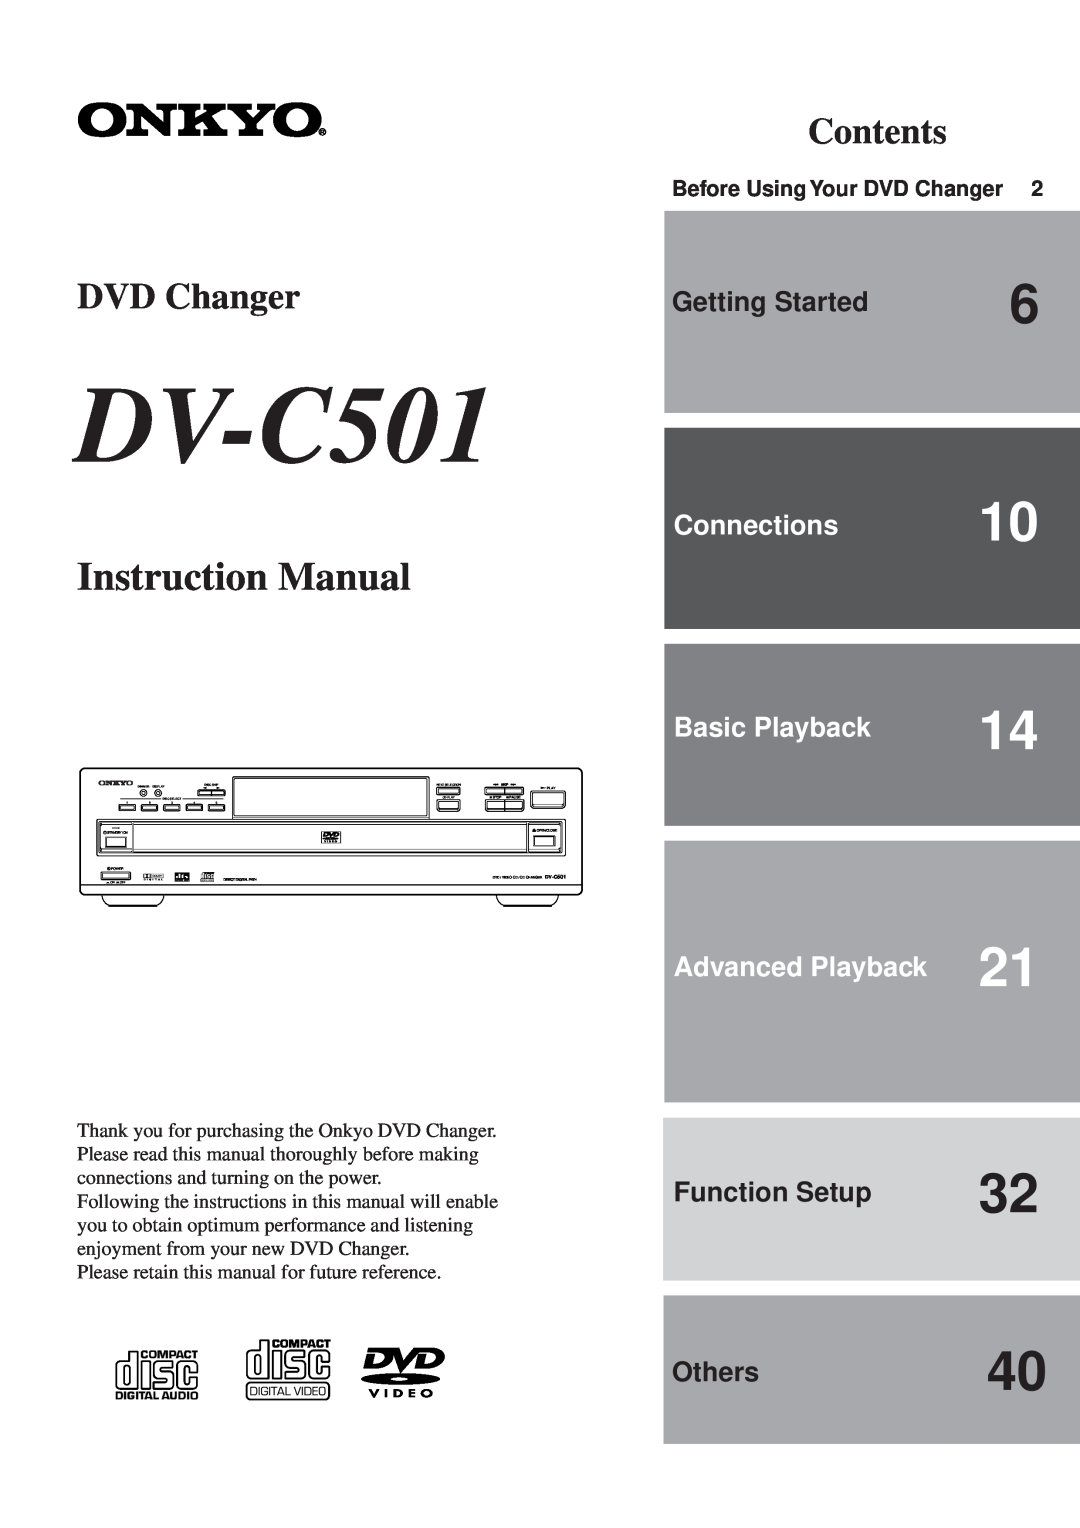 Onkyo DV-C501 instruction manual Getting Started, Function Setup, Others40, DVD Changer, Contents, Connections10 